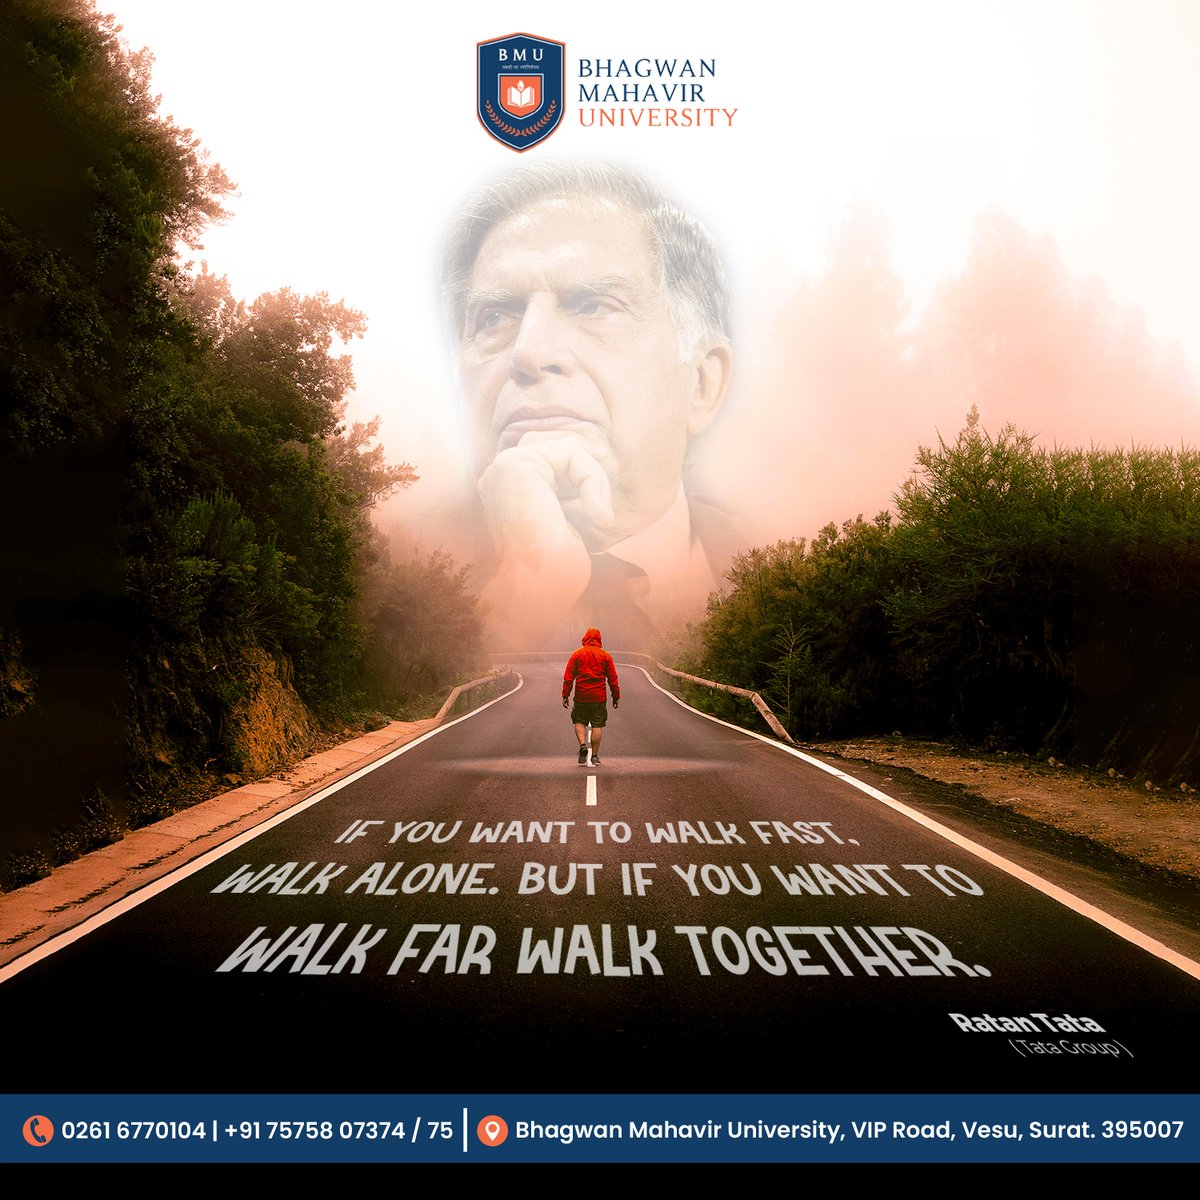 Inspired by Ratan Tata's vision: Progress isn't just about speed, it's about the journey together towards a brighter future.

#walktogether #teamworkwins #TogetherWeAchieve #RatanTataQuote #ratantata #InspirationForSuccess